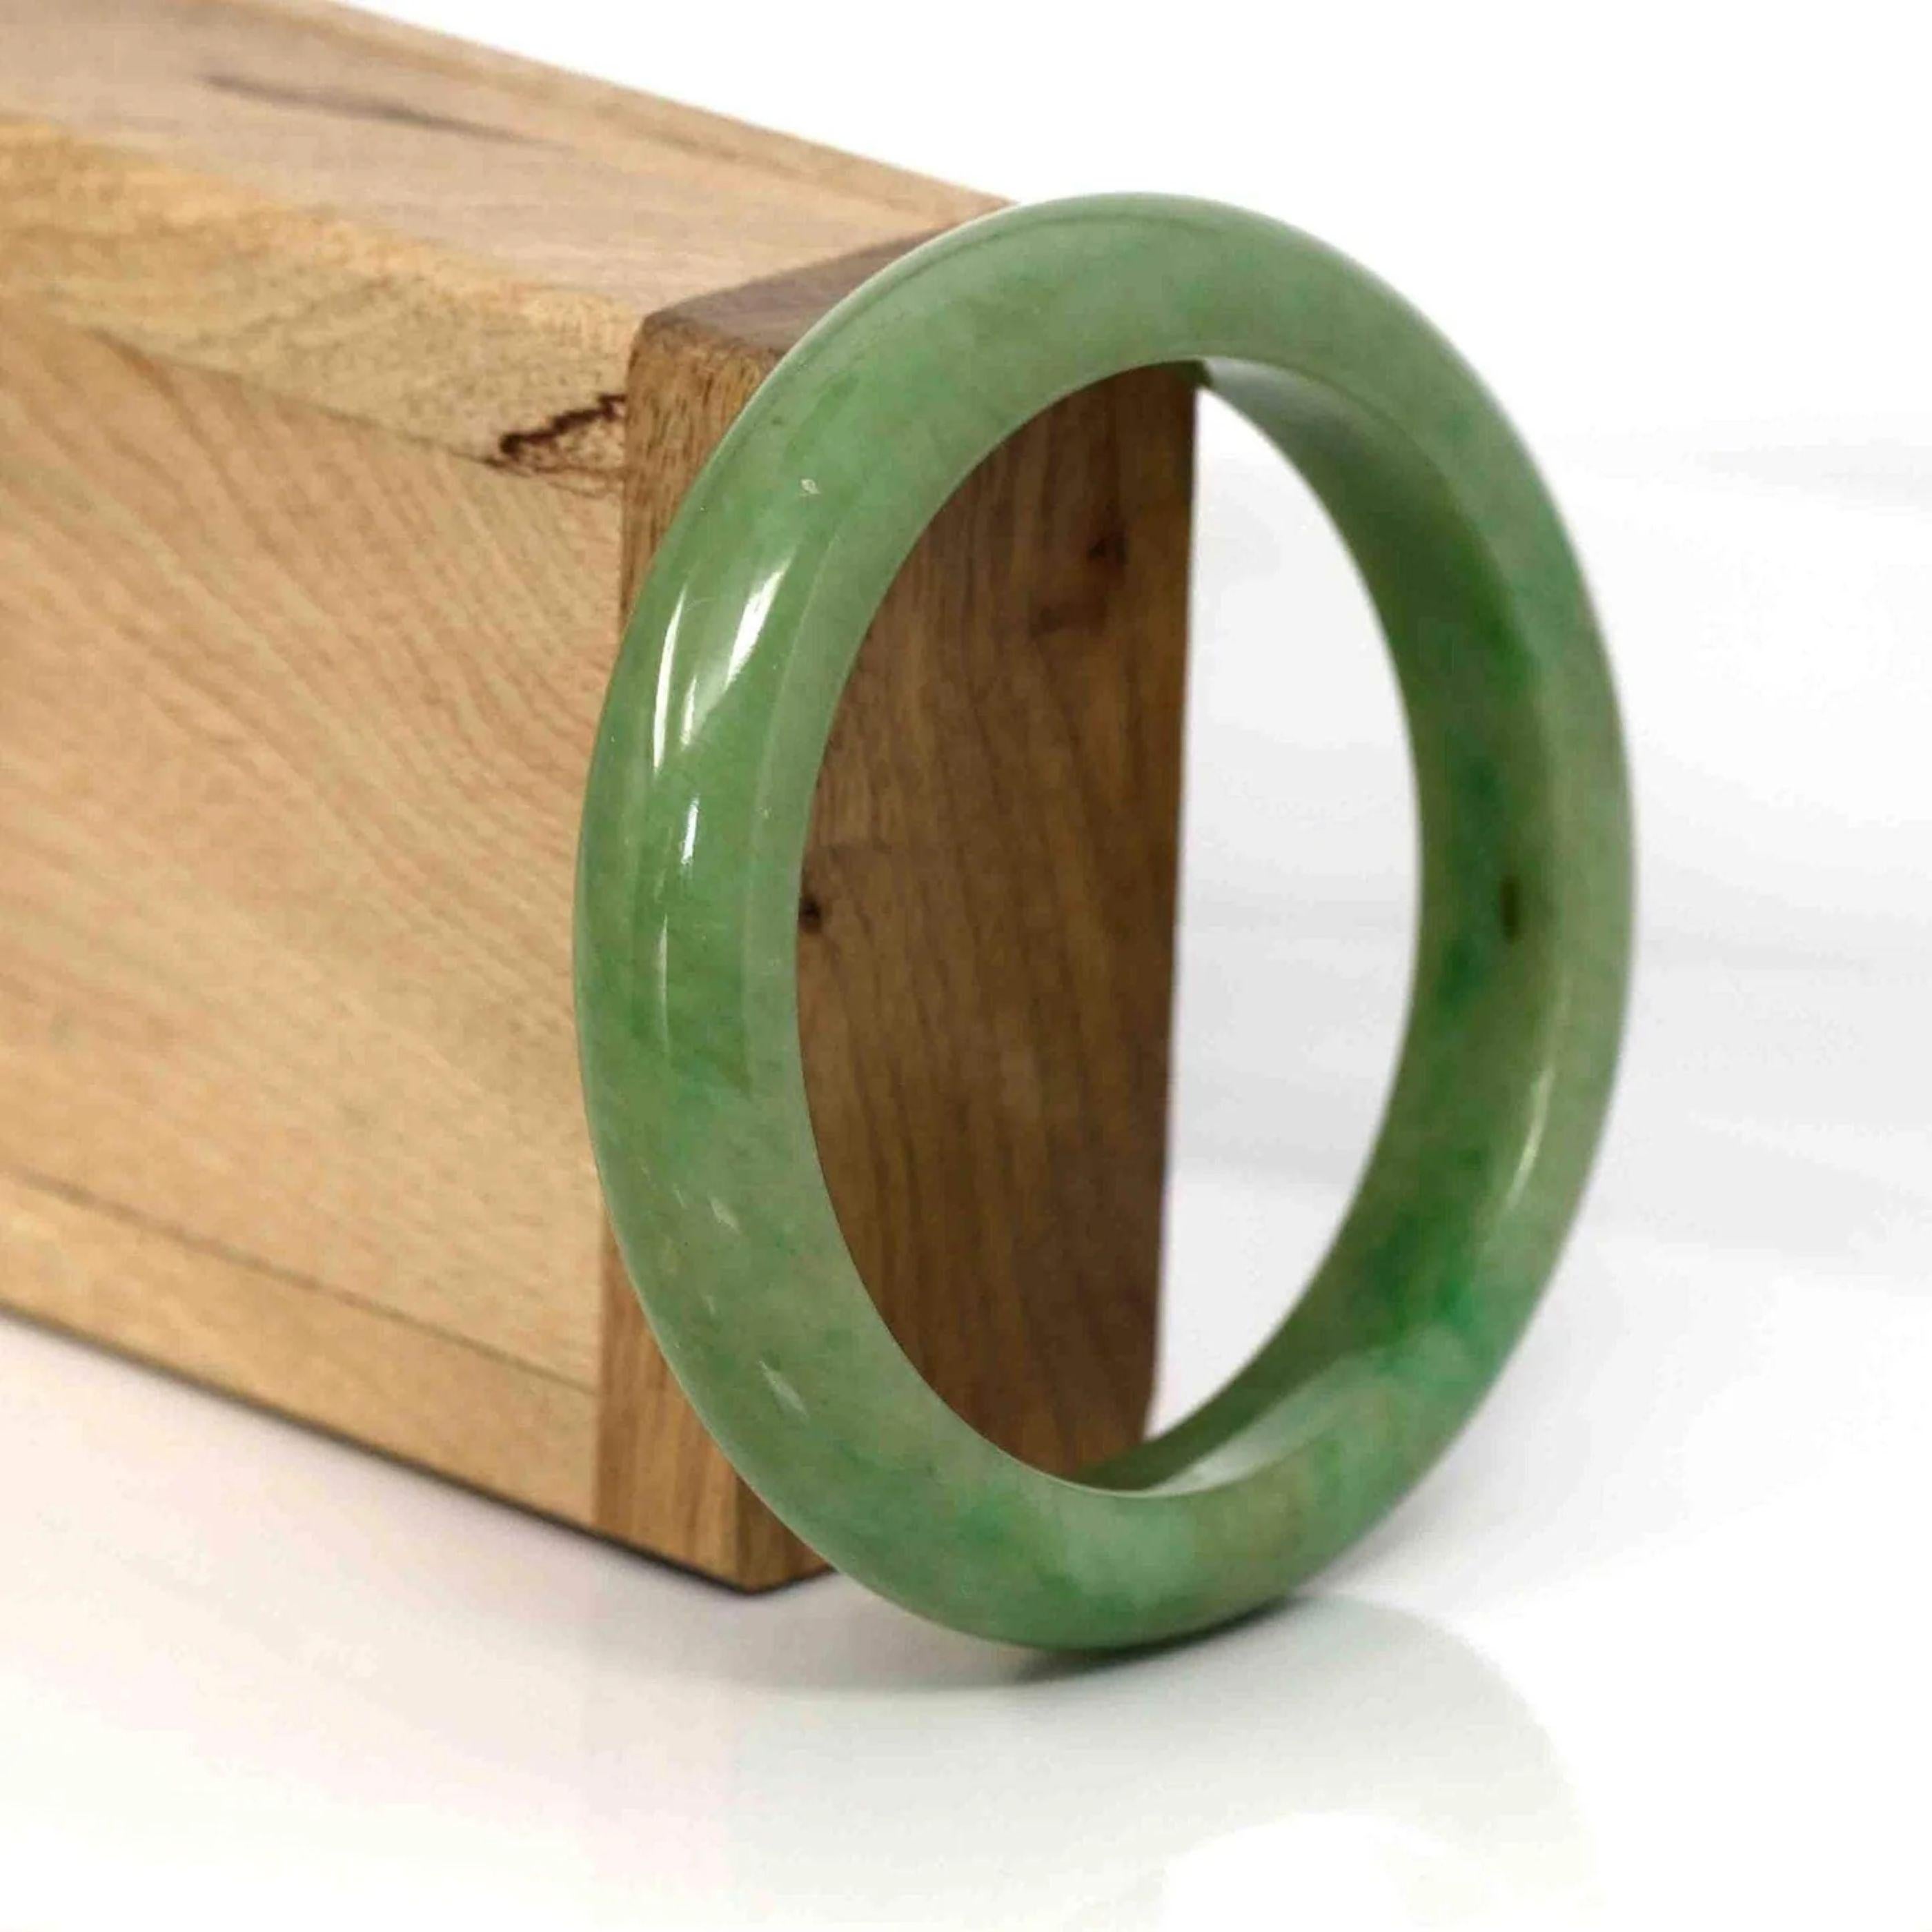 * * DETAILS---This bangle is made with Burmese yellow-green jadeite jade. This bangle is made with very fine texture from old mine. The jade texture is very smooth, with part of the green color and yellowish.  It's a very unique bangle with a